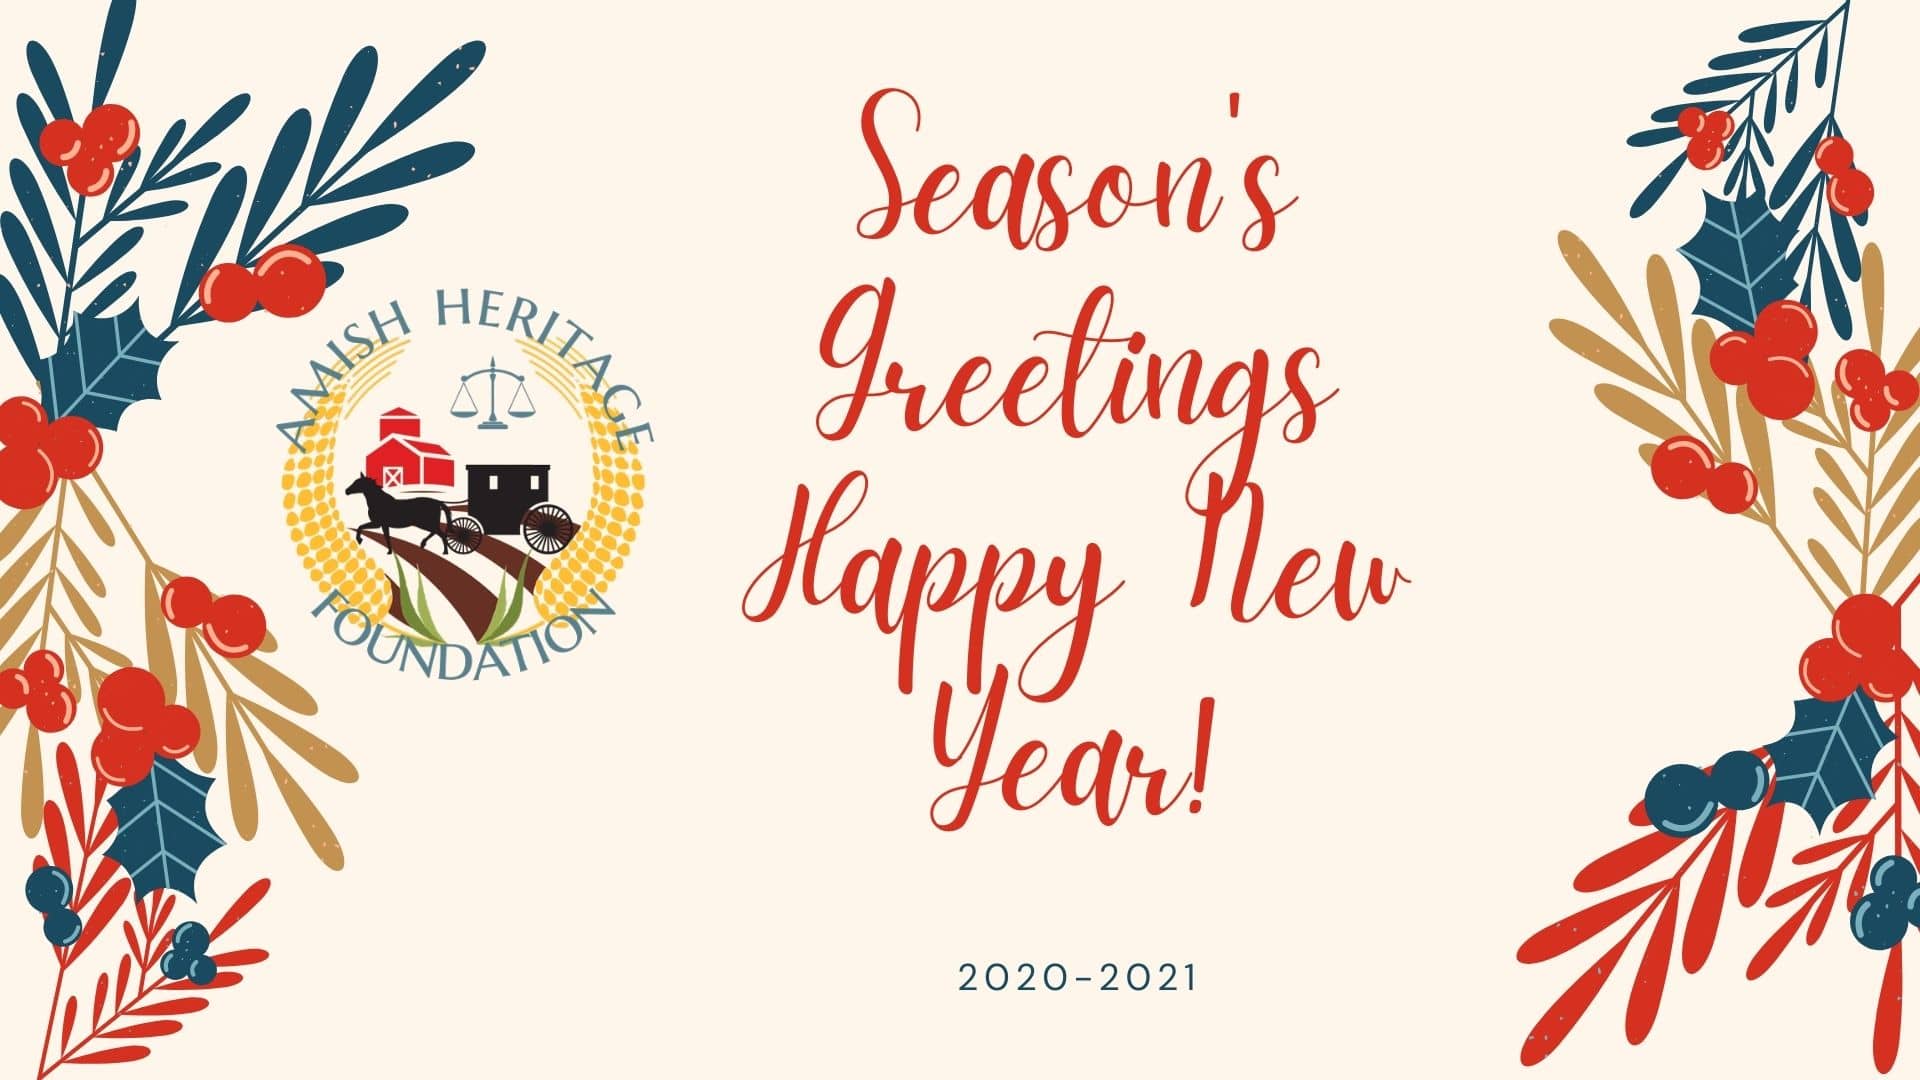 A Seasons Greetings & Happy New Year Video – From Torah Bontrager and The Amish Heritage Foundation